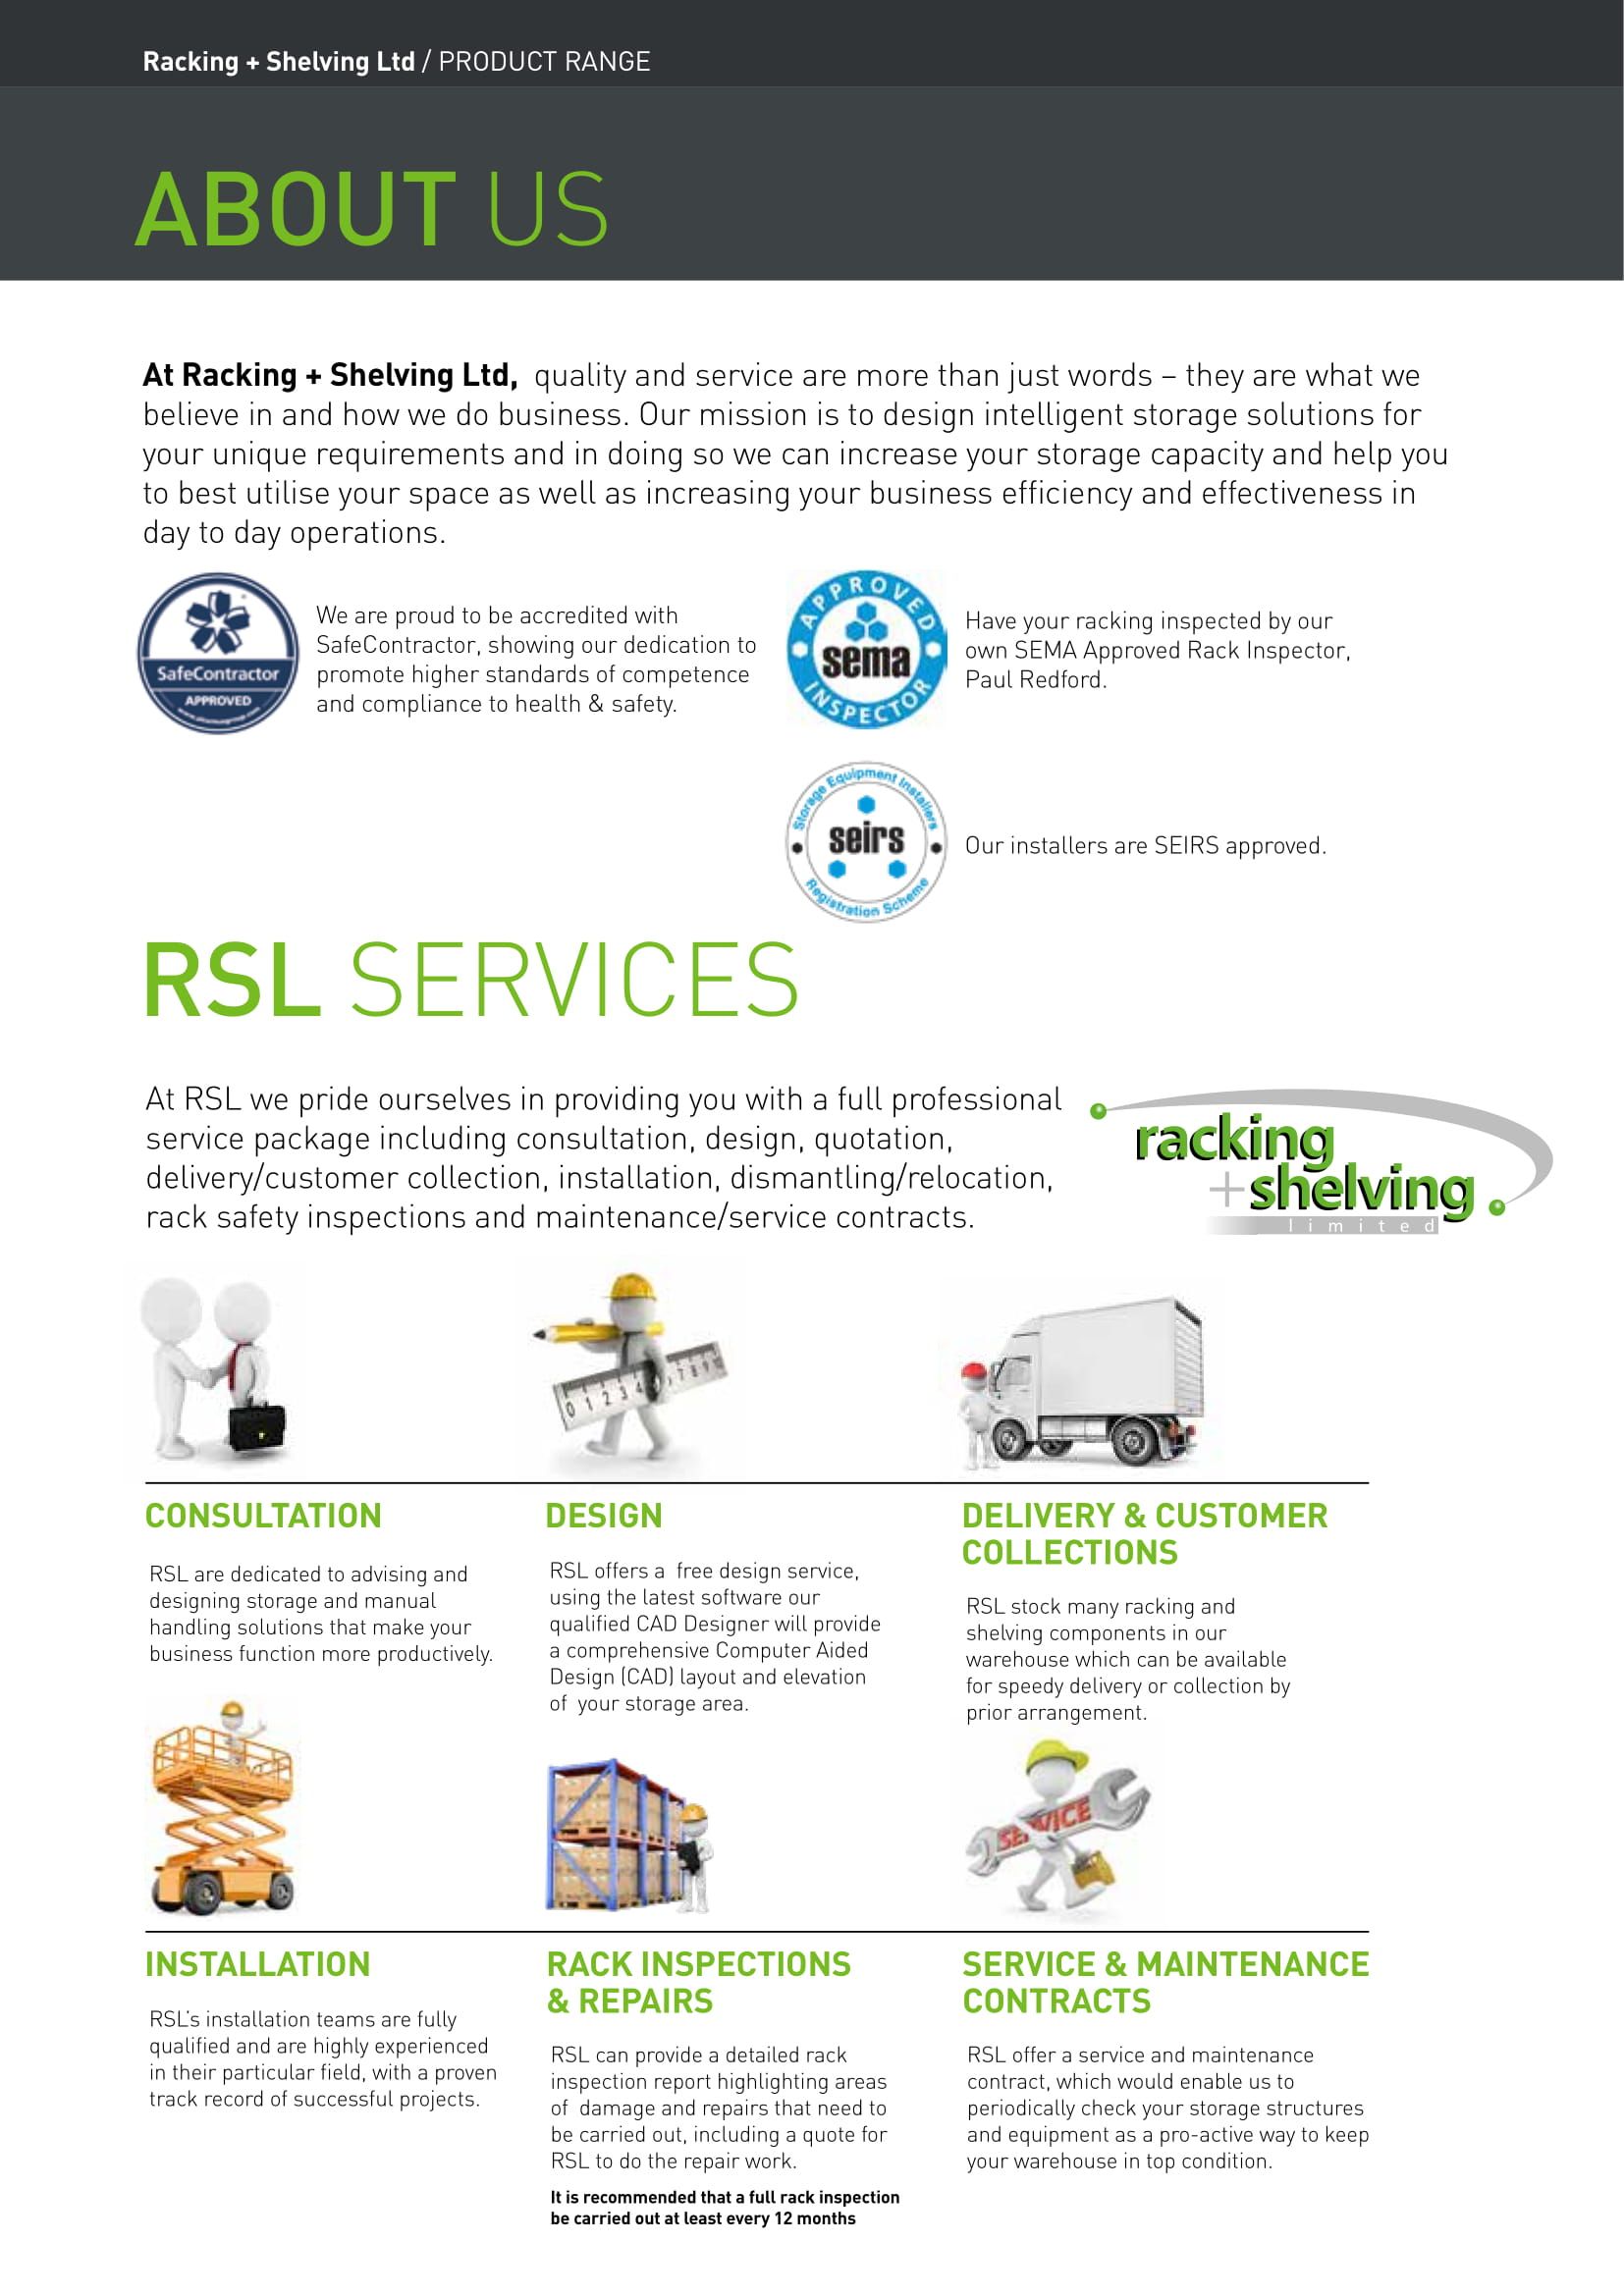 About us page in RSLNI brochure listing their services